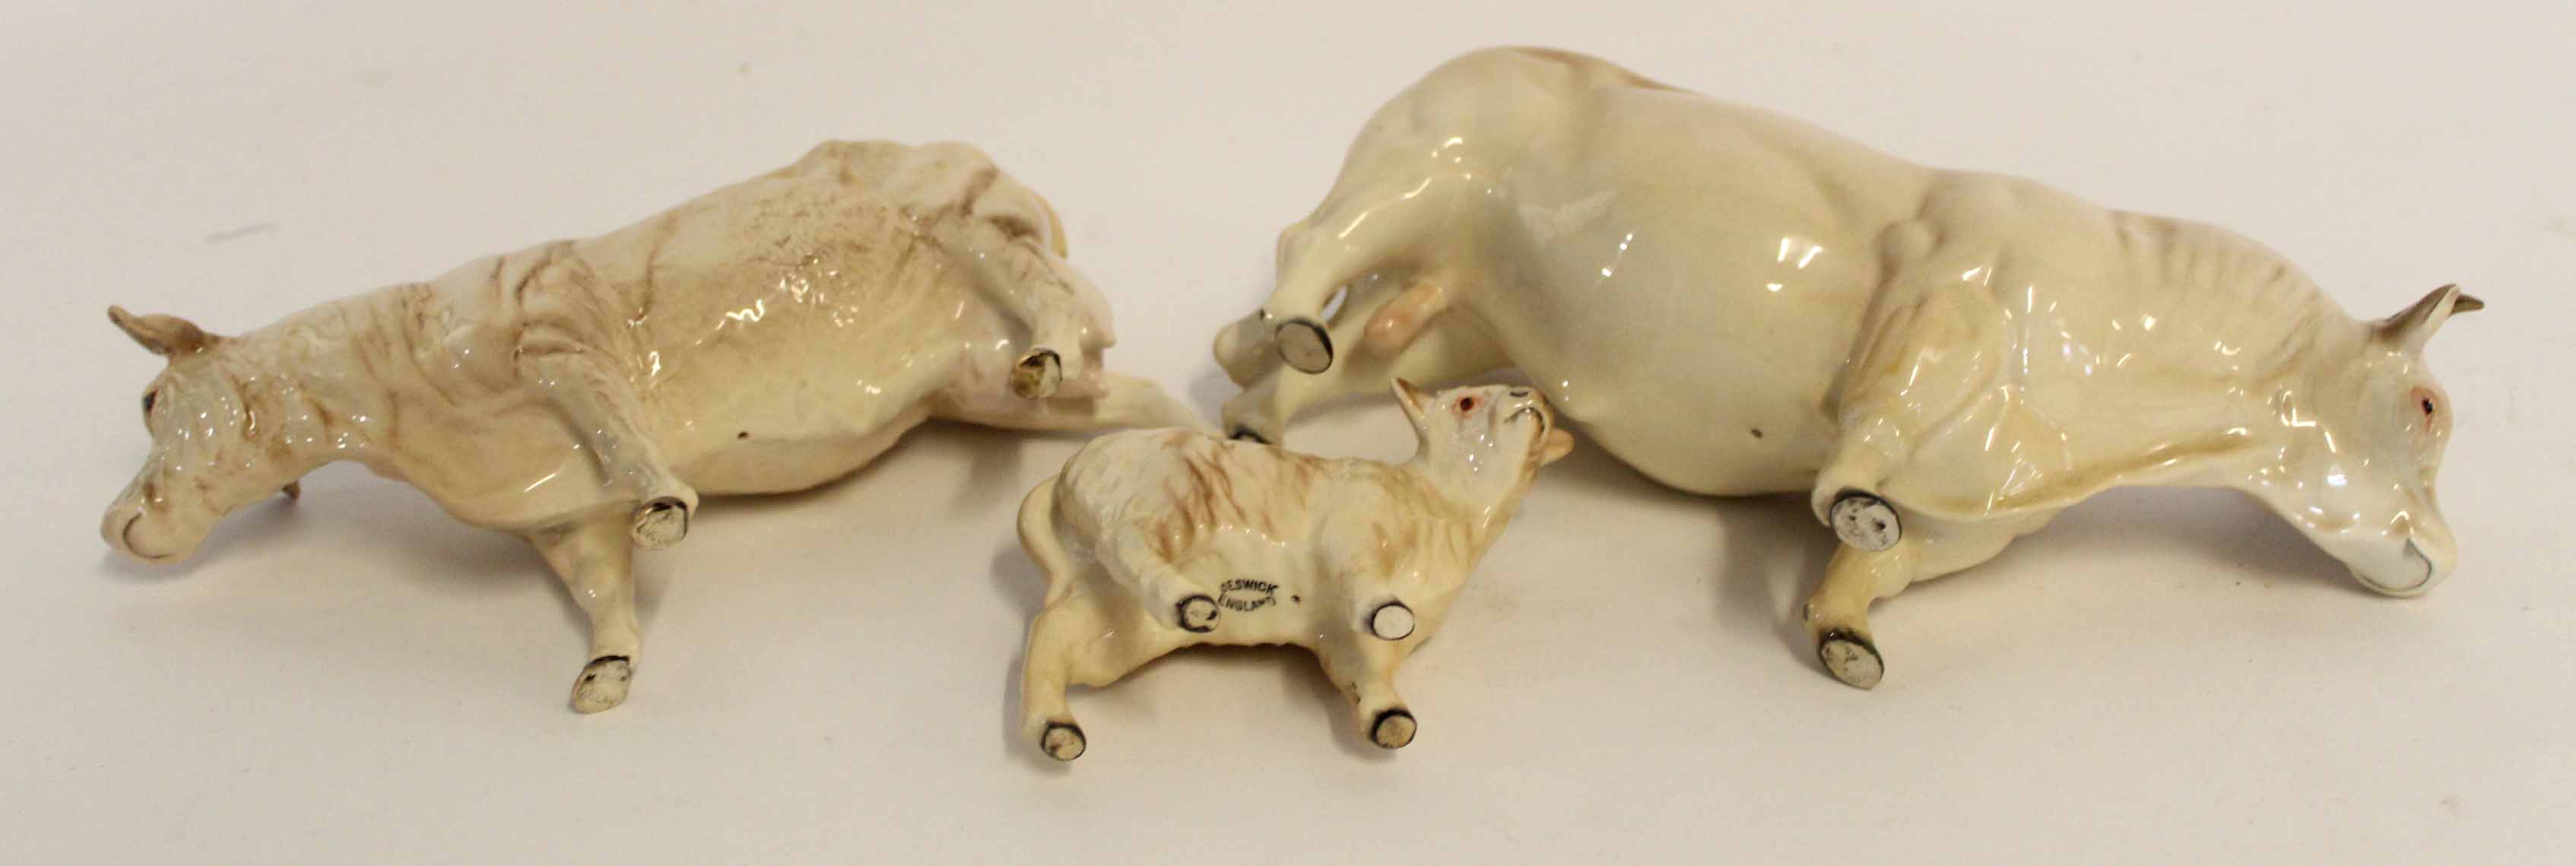 Collection of John Beswick figures comprising a bull, cow and calf (3) - Image 3 of 4